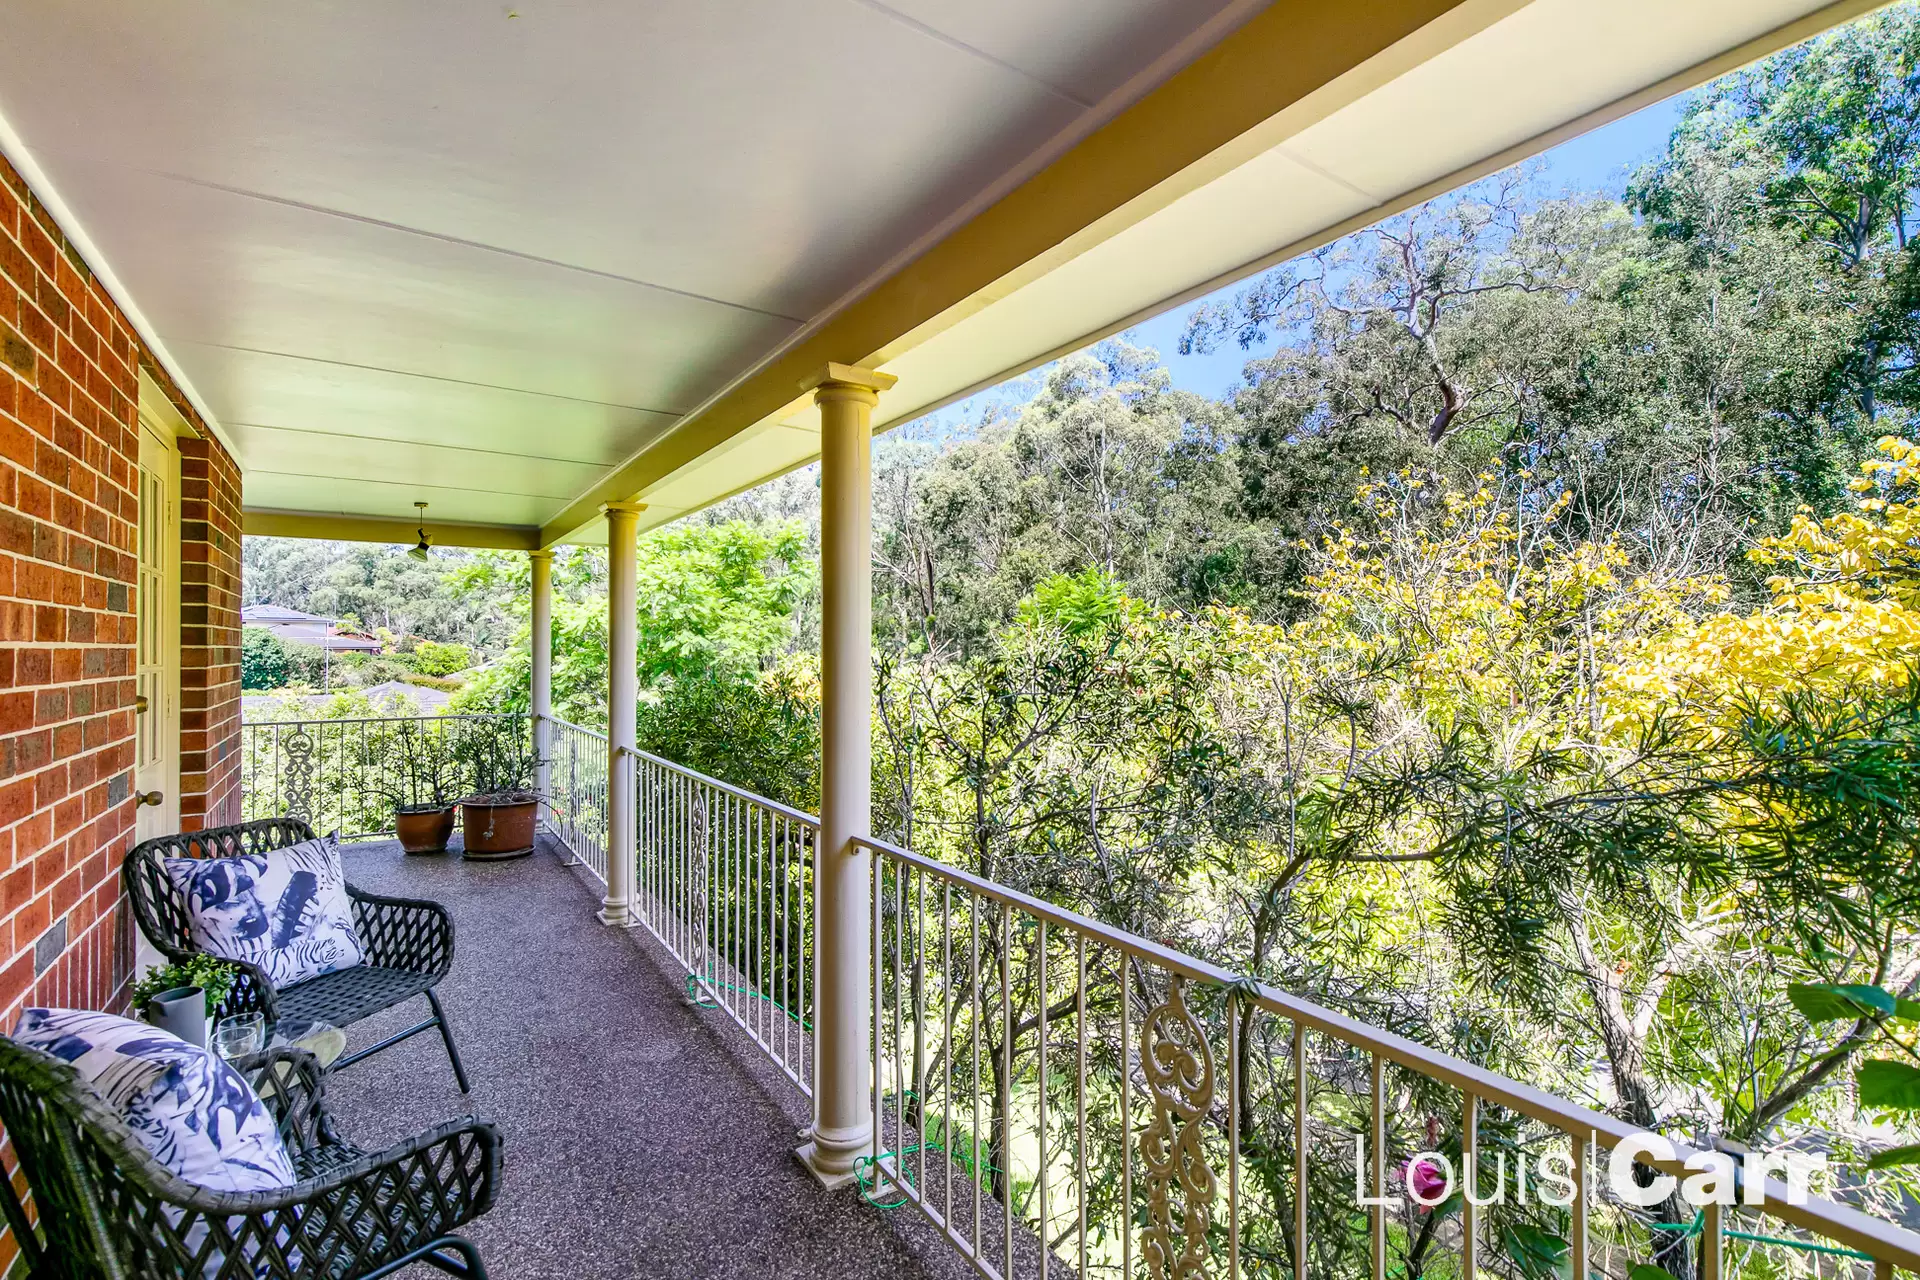 Photo #2: 8 Childrey Place, Castle Hill - Sold by Louis Carr Real Estate